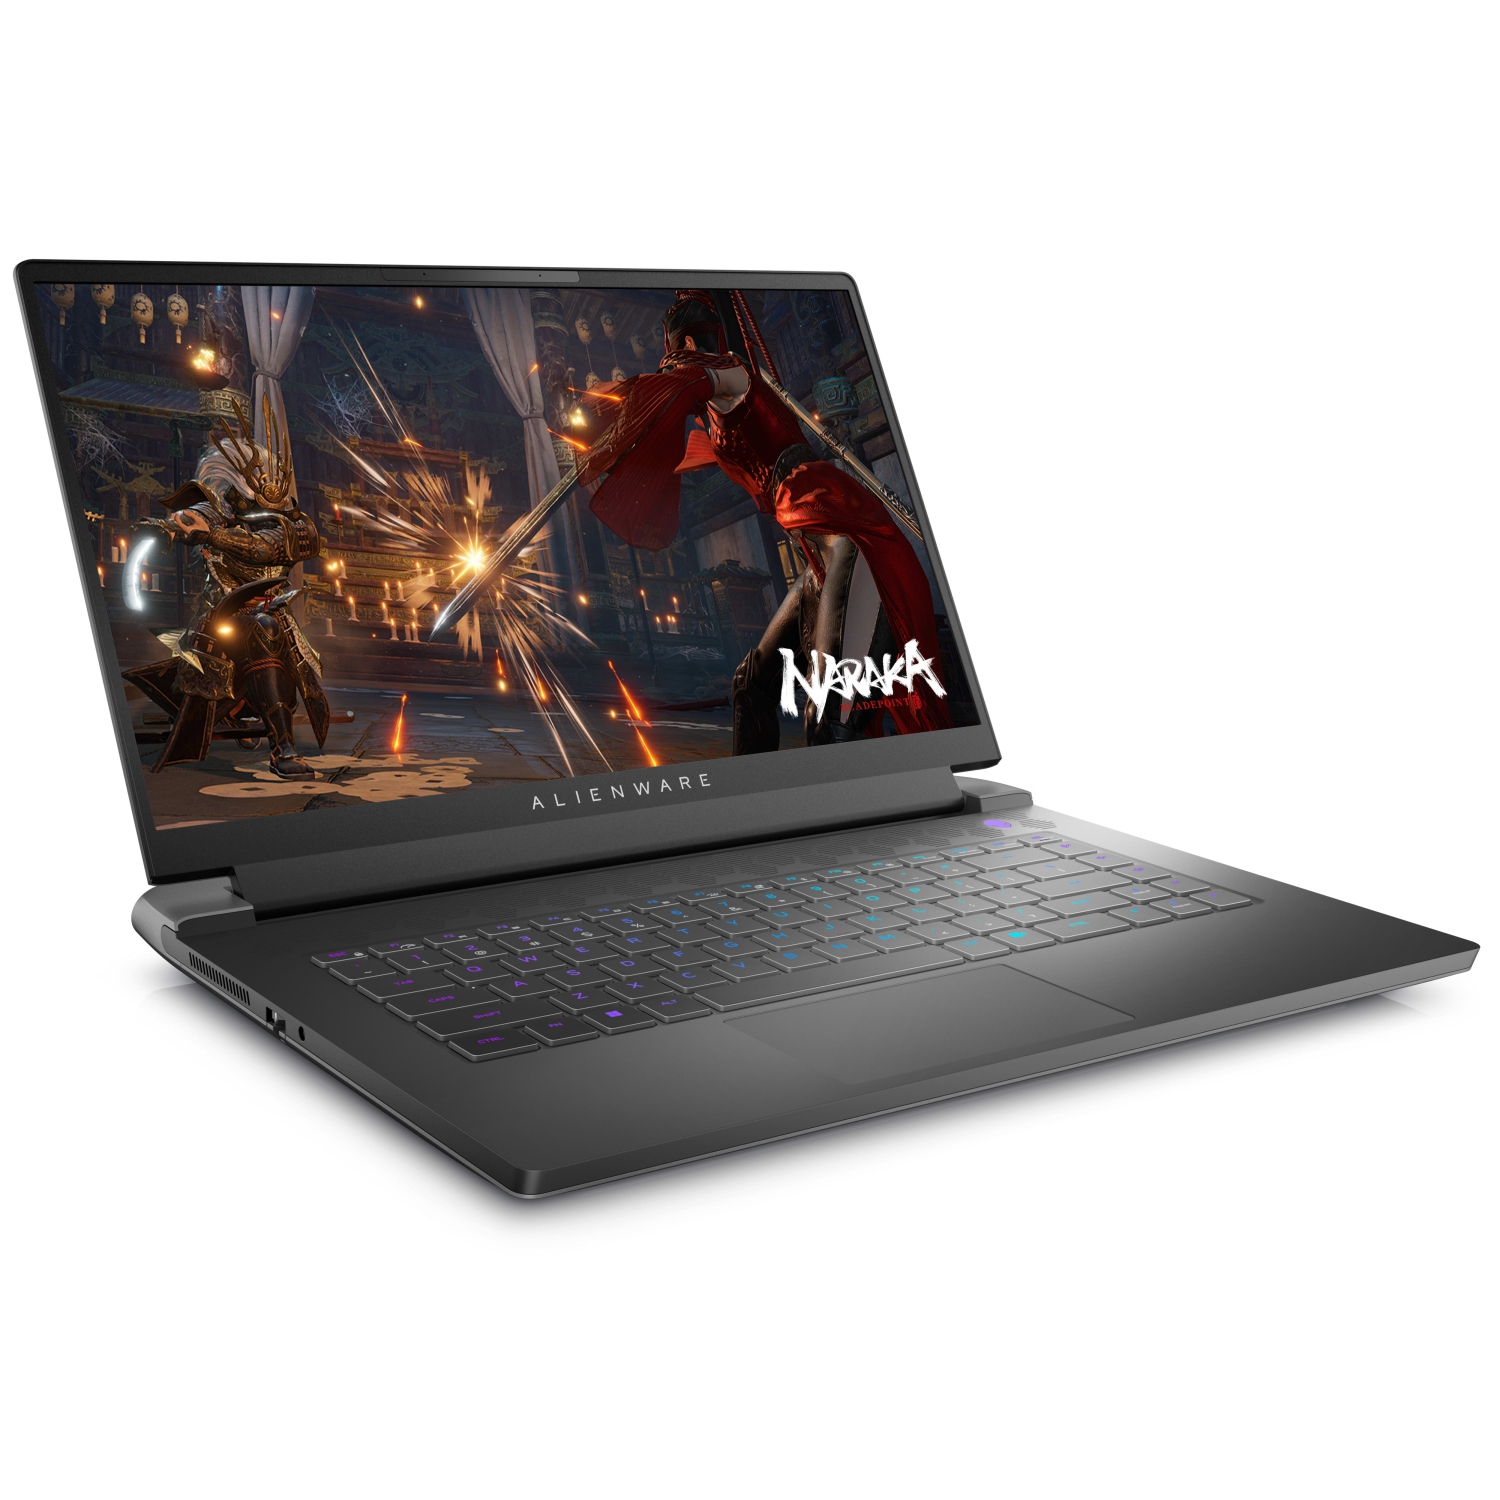 Refurbished (Excellent) – Dell Alienware m15 R7 Gaming Laptop (2022) | 15.6" FHD | Core i9 - 1TB SSD - 32GB RAM - RTX 3080 | 14 Cores @ 5 GHz - 12th Gen CPU - 8GB GDDR6X